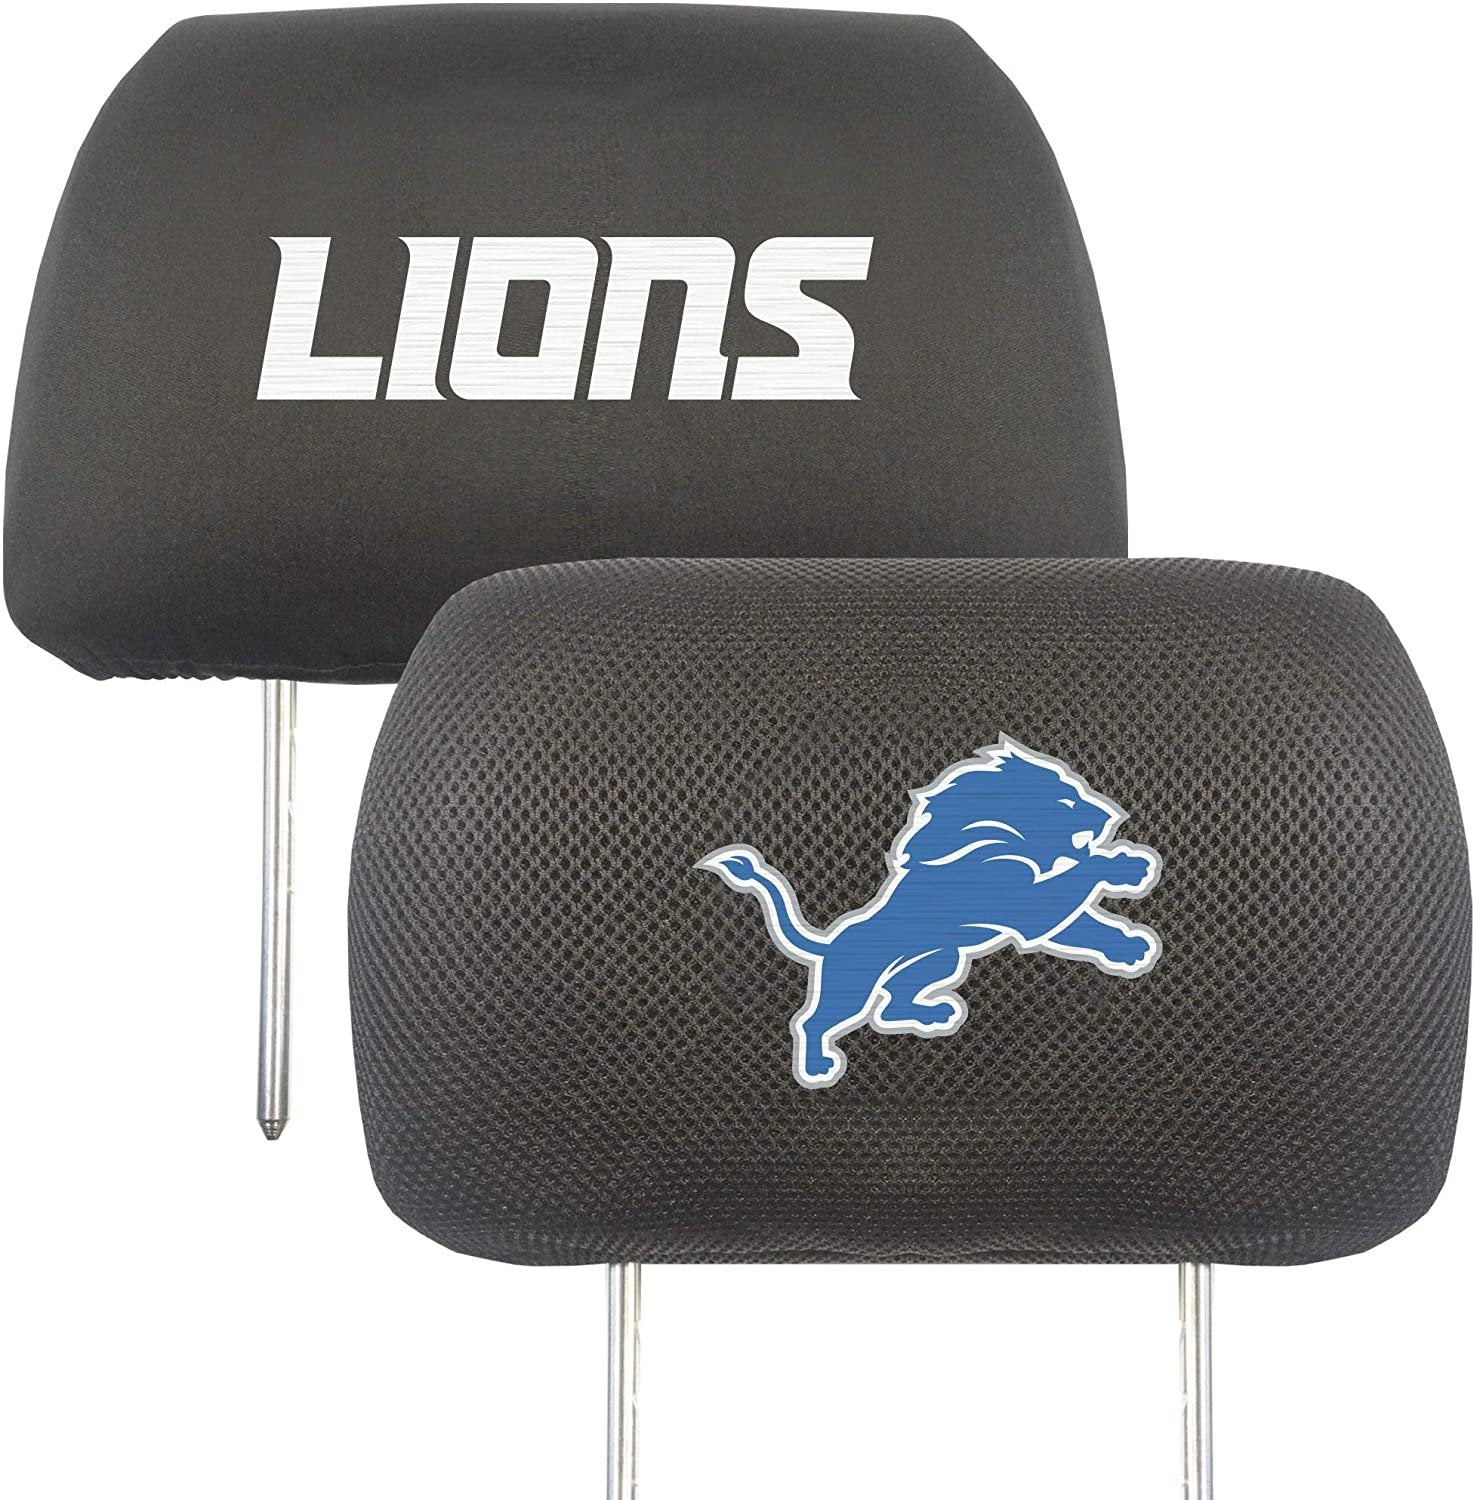 Detroit Lions Pair of Premium Auto Head Rest Covers, Embroidered, Black Elastic, 14x10 Inch